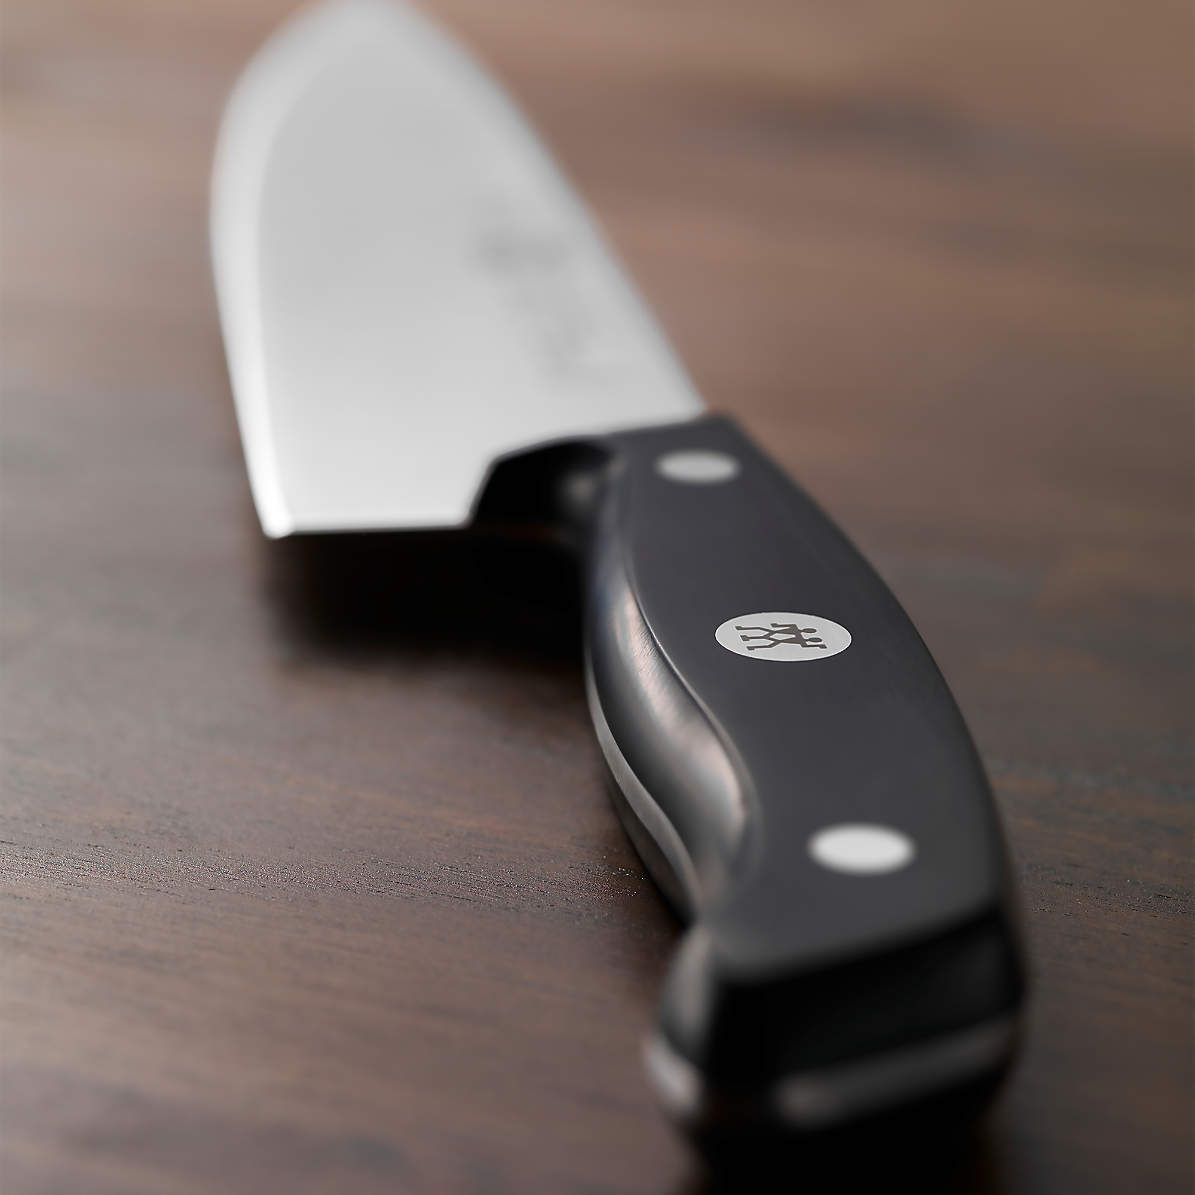 Zwilling Gourmet 8-Inch Chef's Knife